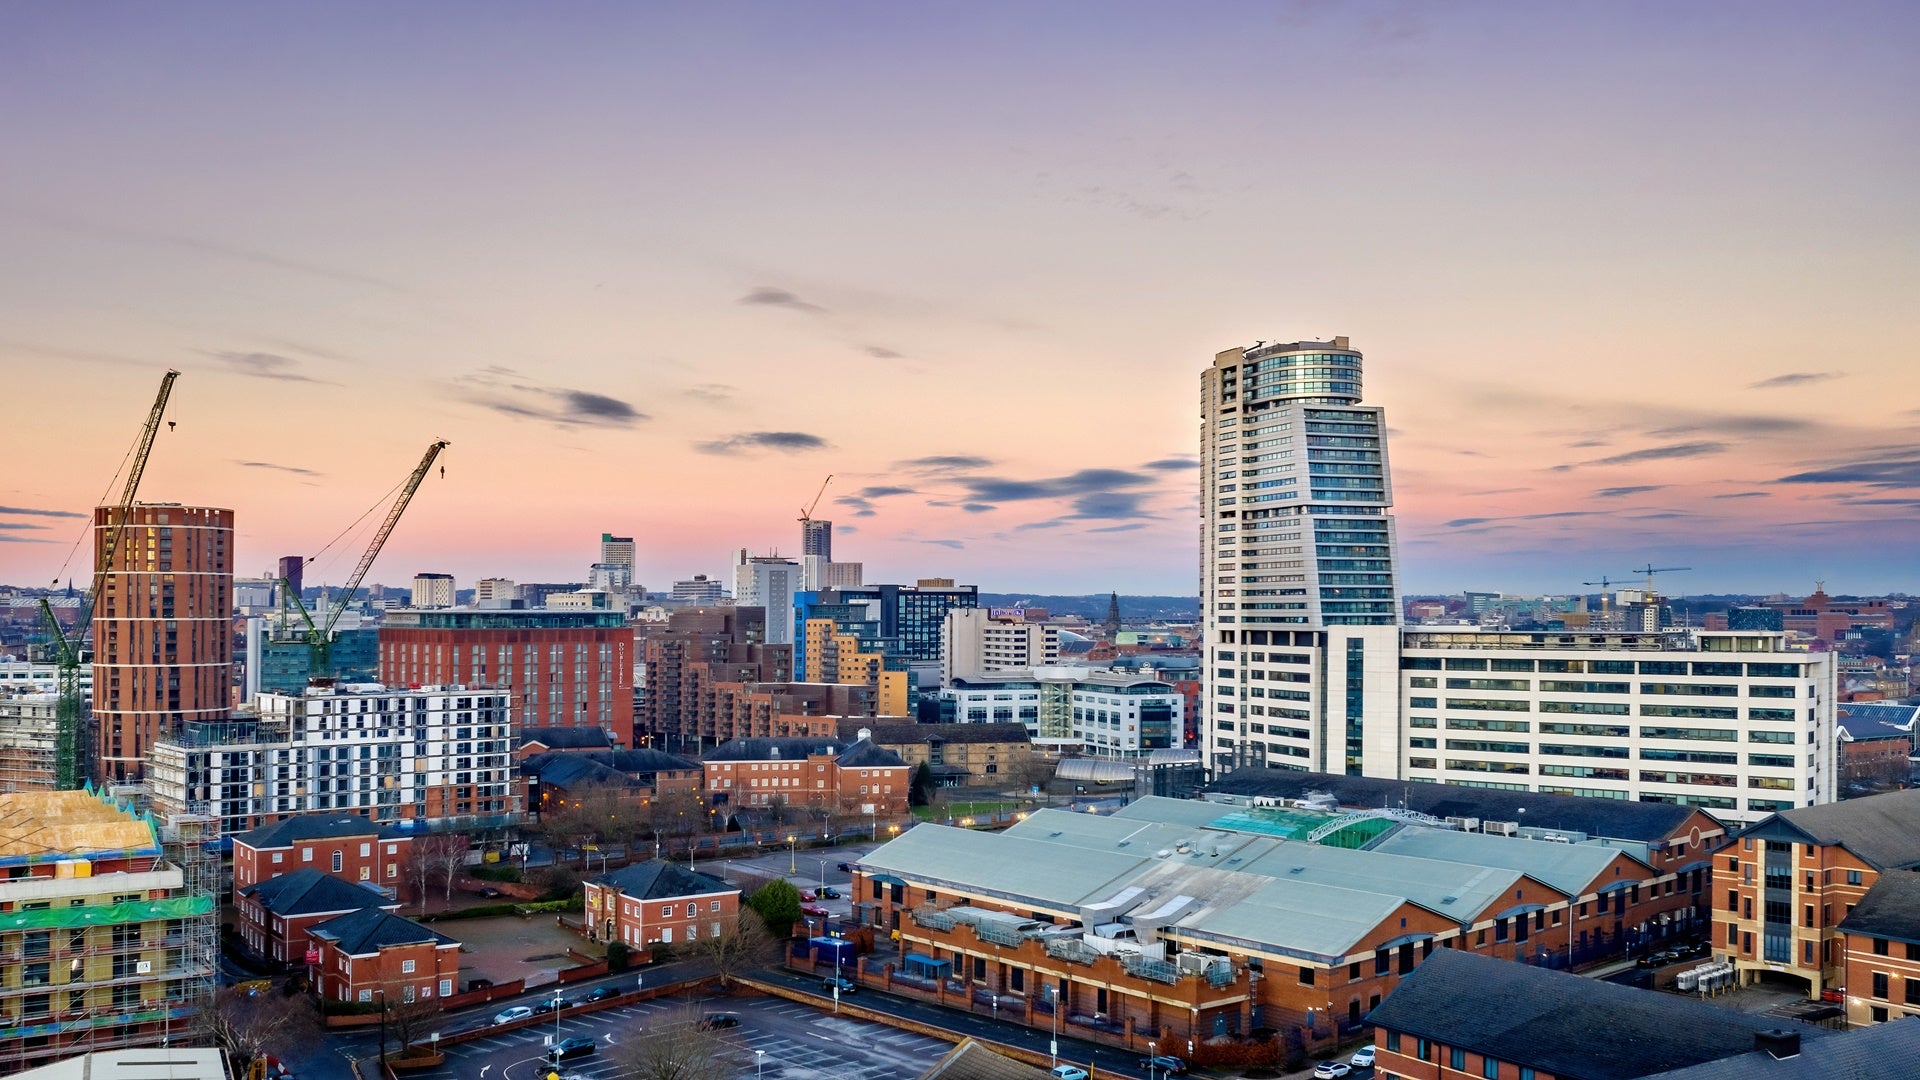 Bridgewater Place and Leeds City Centre aerial view at sunset. Y